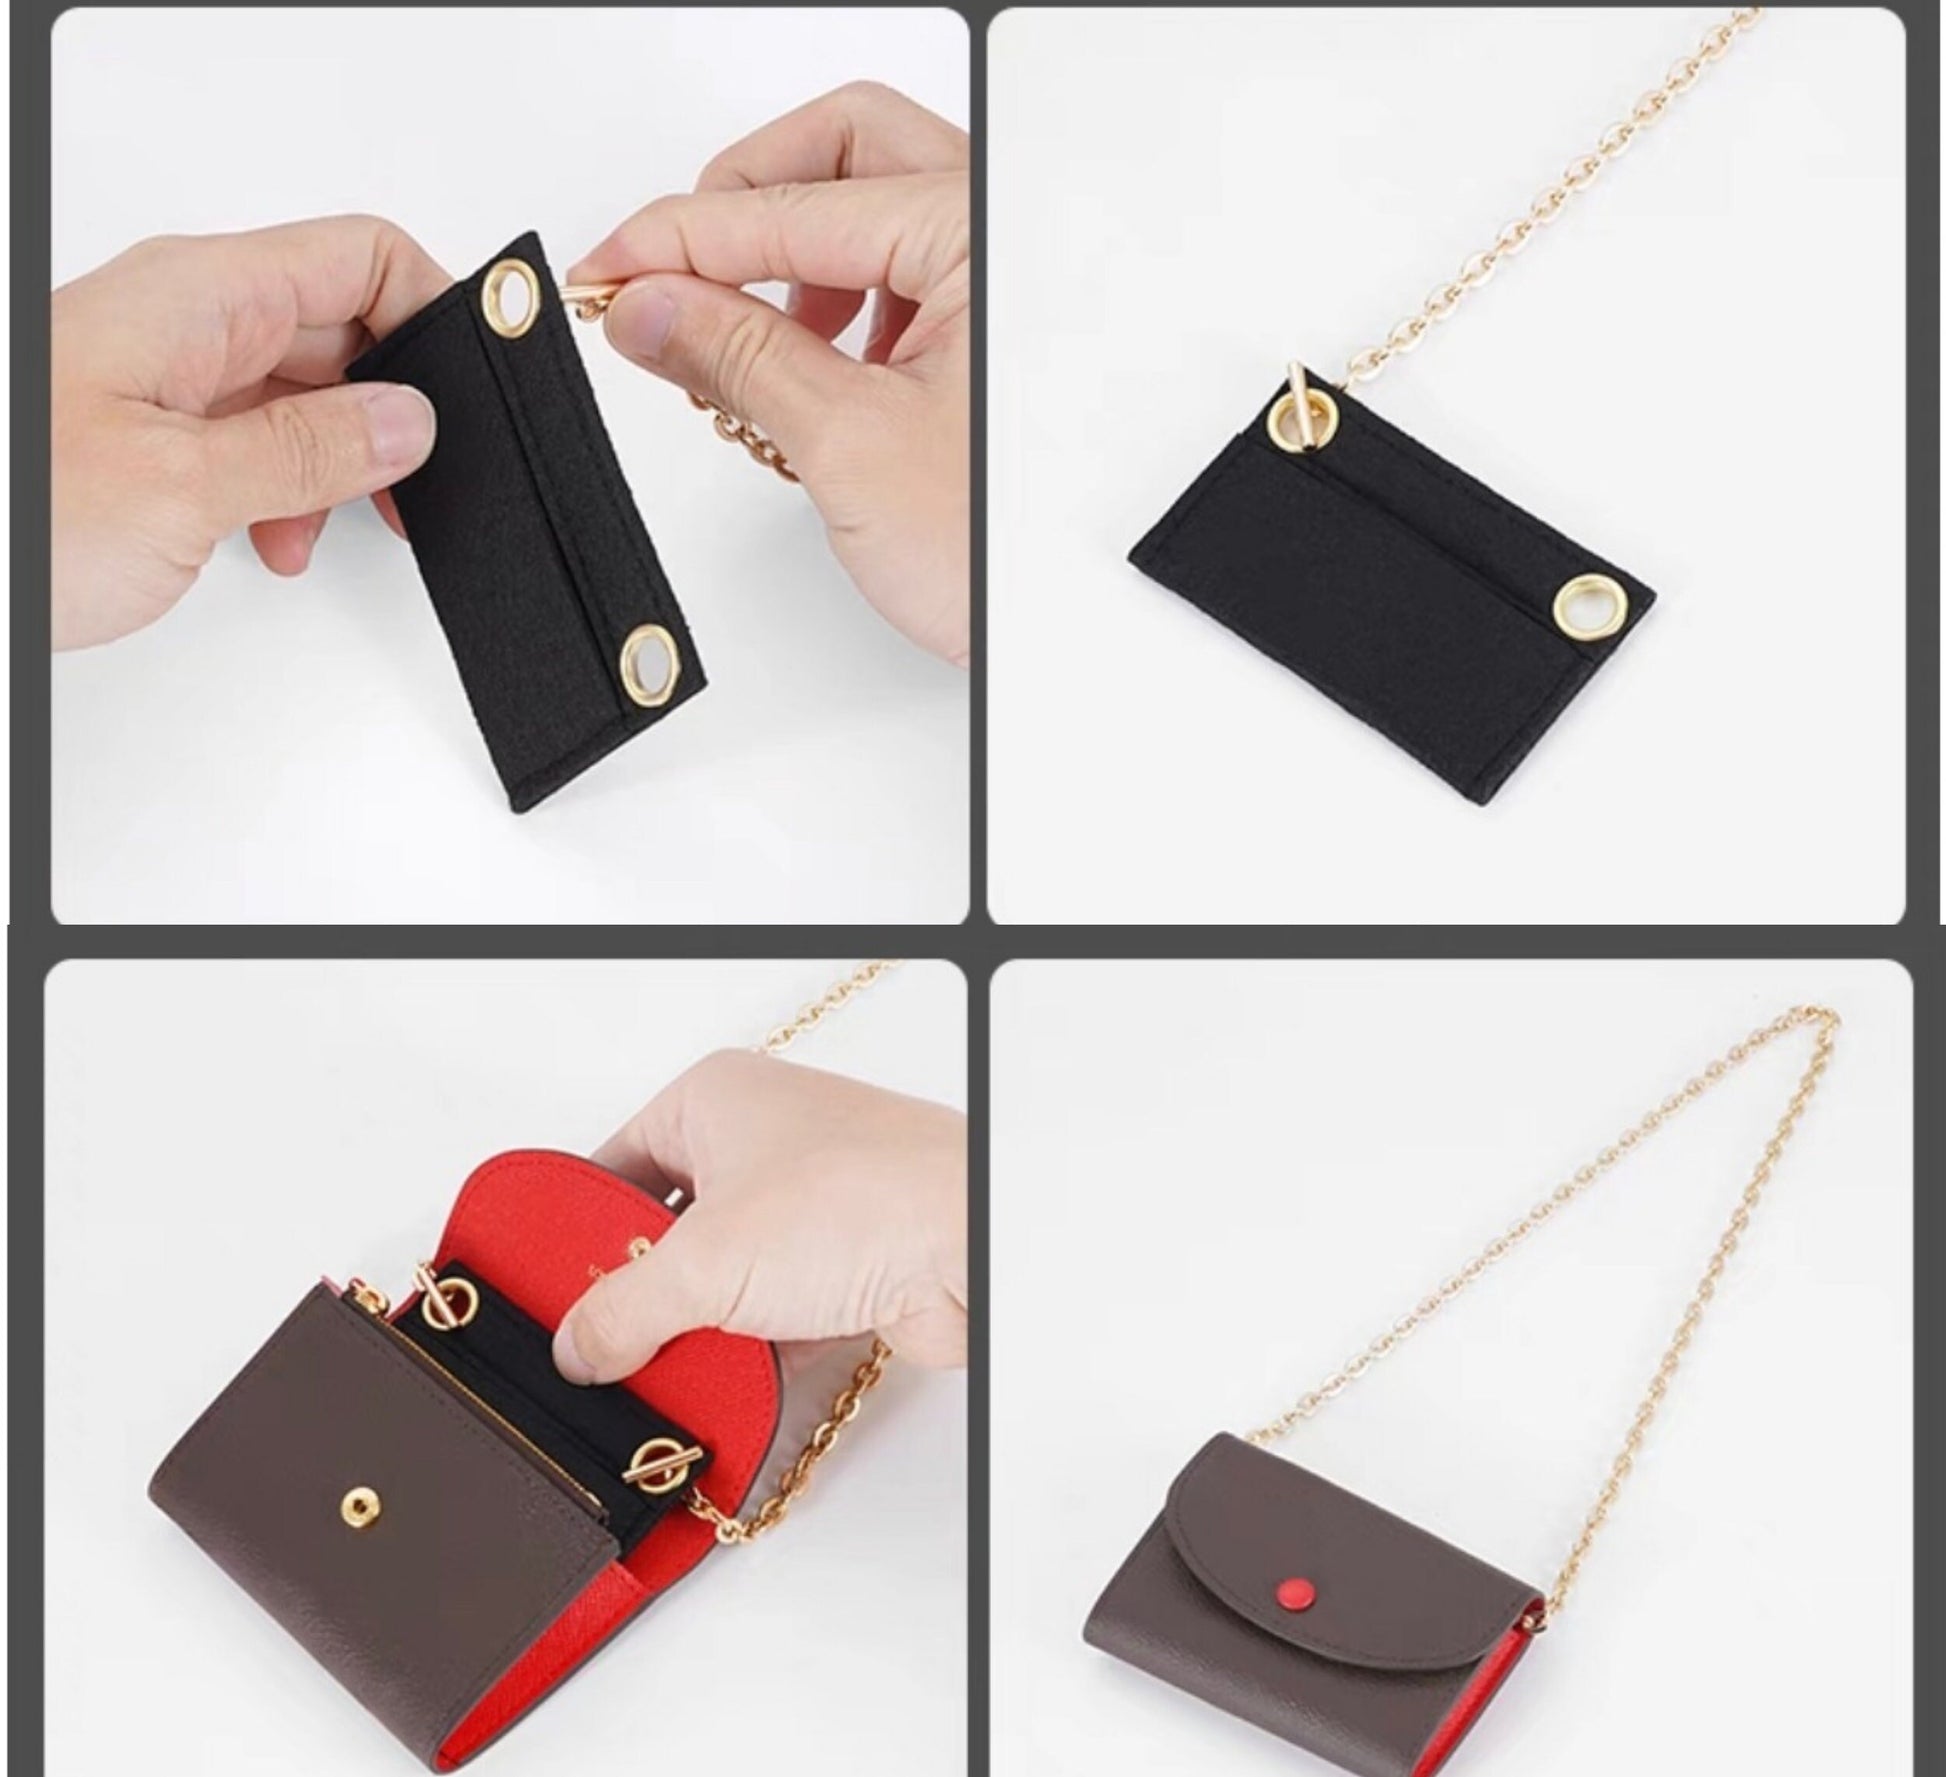 From HER Purse Insert Conversion Kit with Gold Chain for Sarah Emilie  Wallet to Crossbody (BLACK)